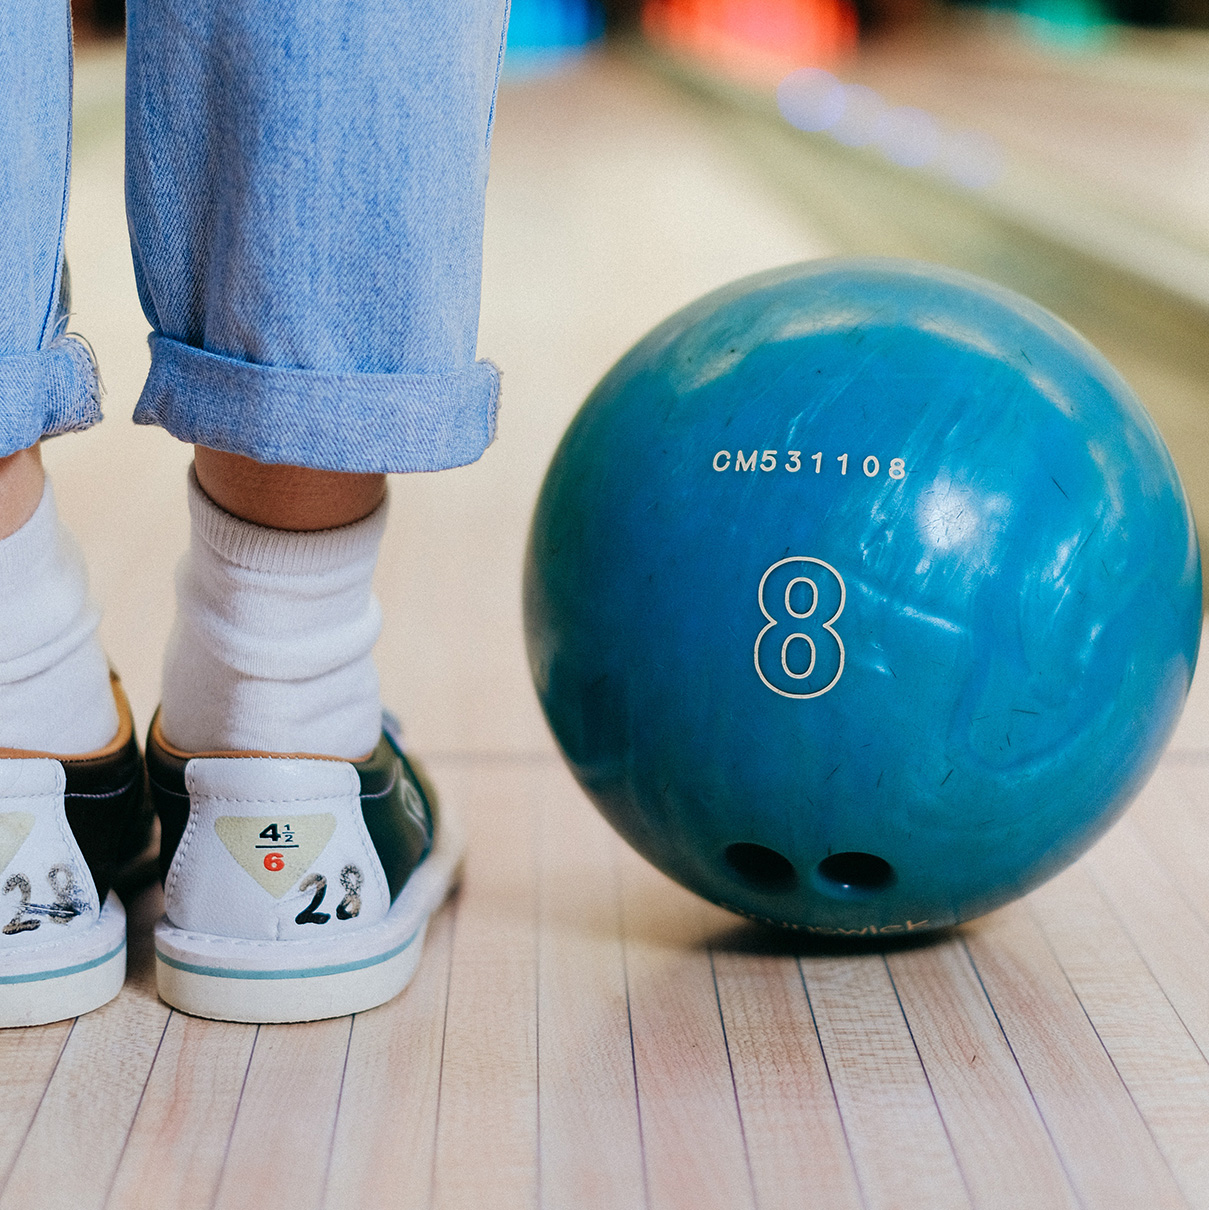 Thumbnail content for 'Bowling'